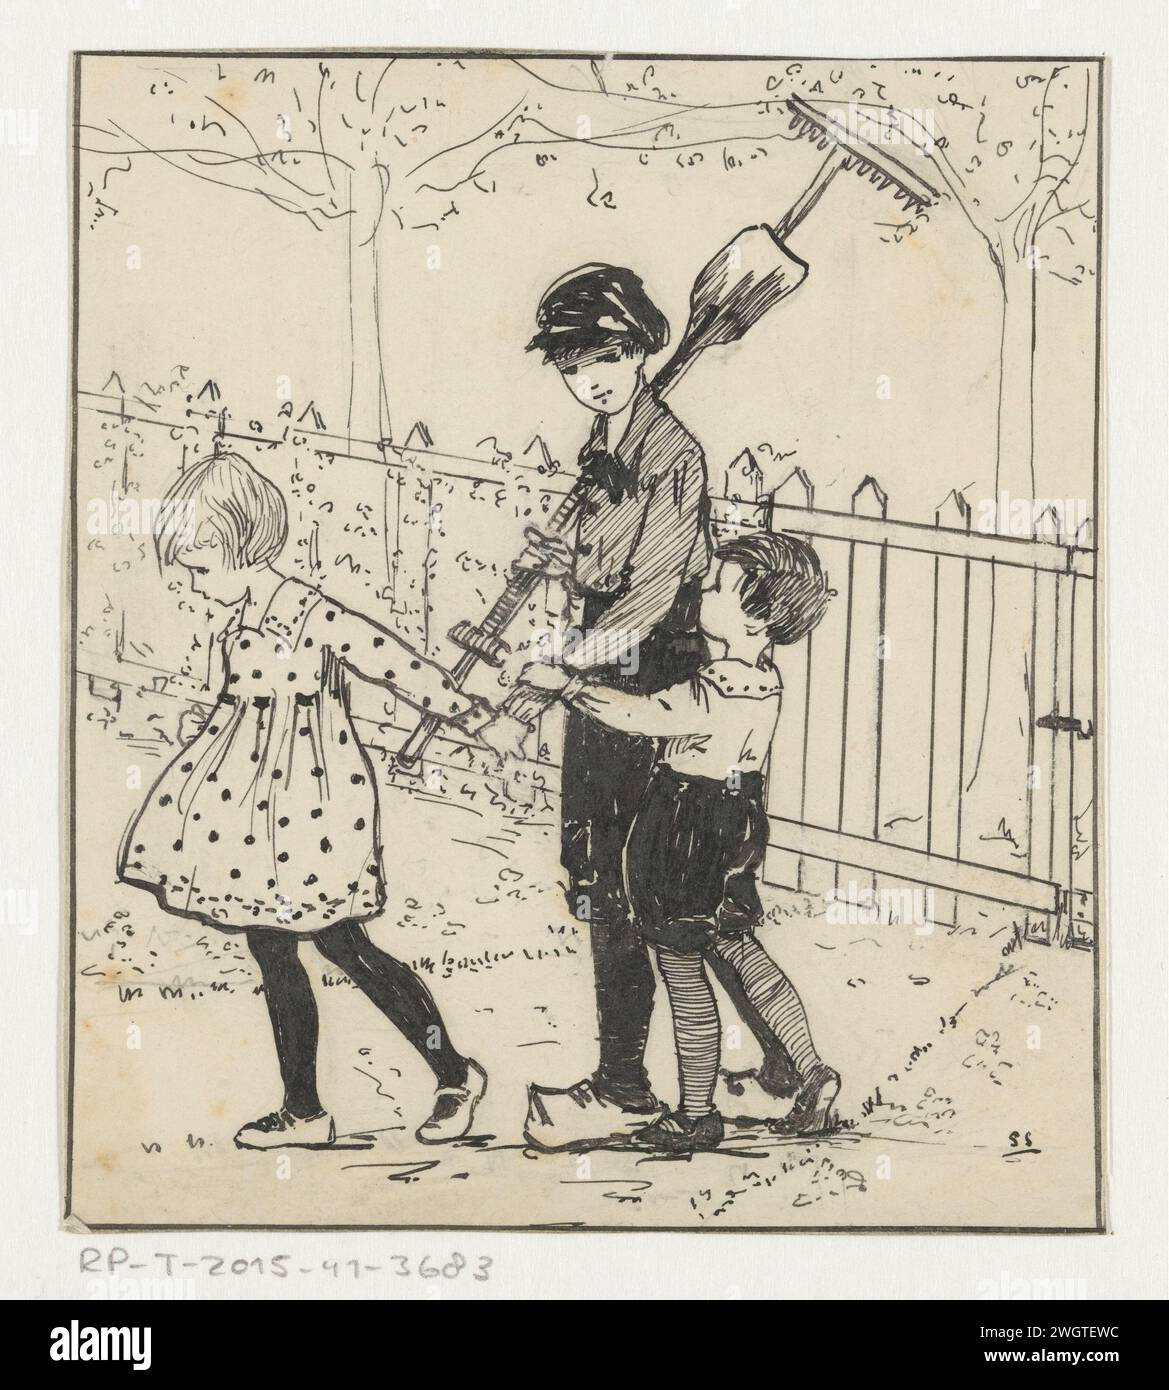 Children pull the arm of a boy, unknown, c. 1880 - c. 1930 drawing A boy and girl pull on the arm of an older boy who wears a kick and rake. A garden fence in the background.  cardboard. pencil. India ink (ink) pen / brush gardening-tools. fence, wall, paling Stock Photo